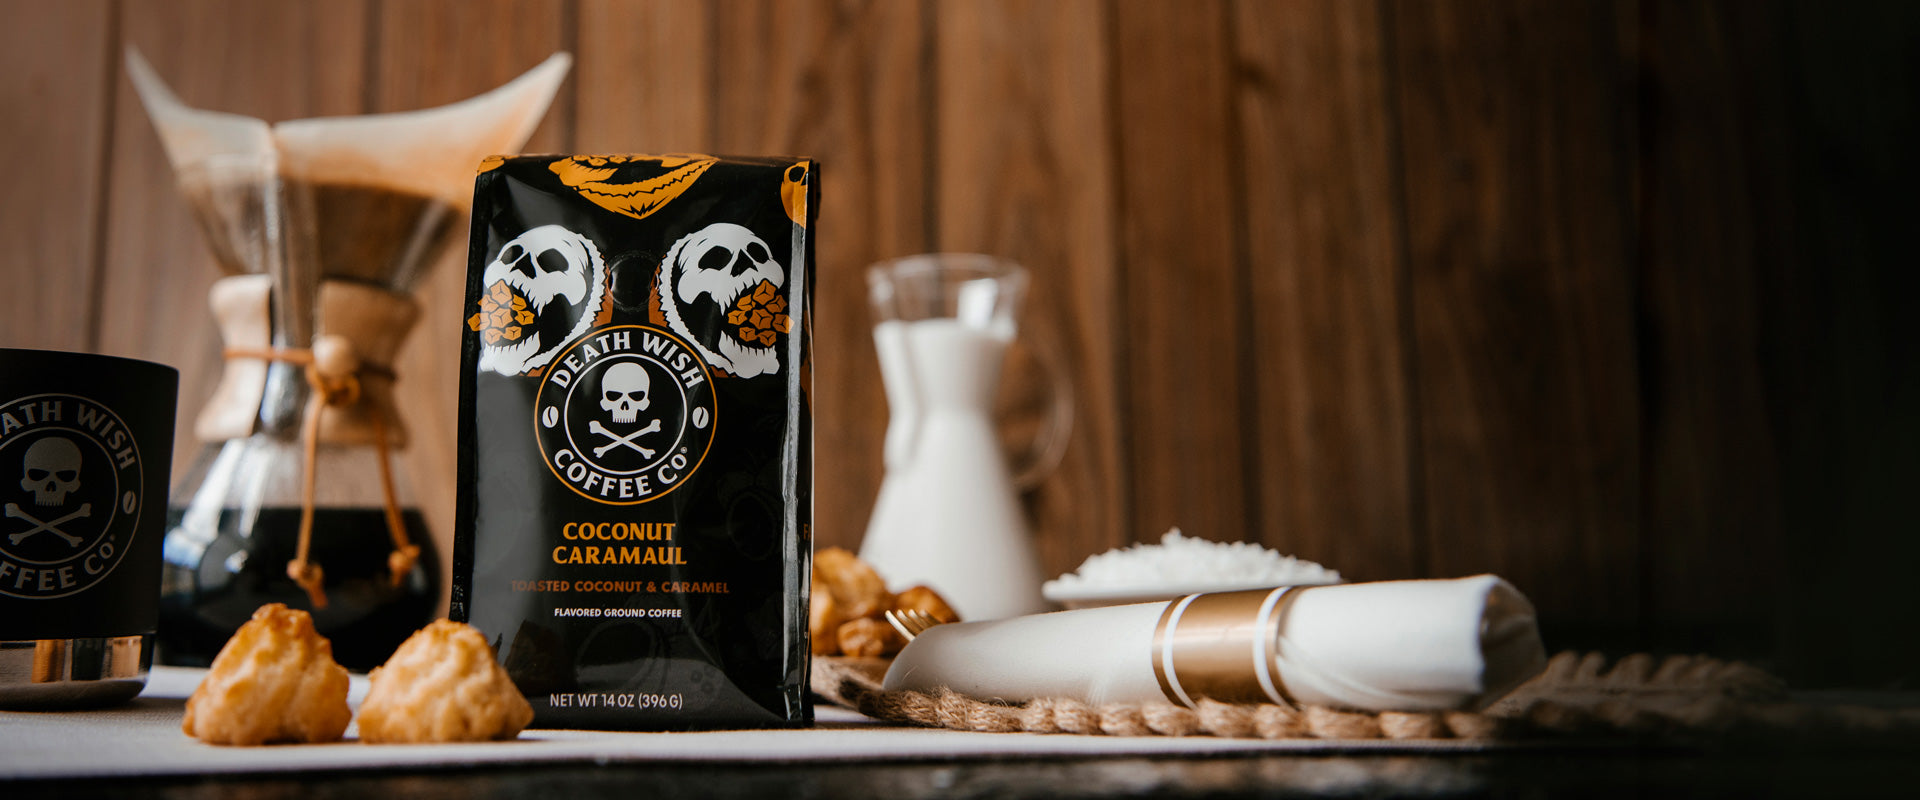 Coconut Caramaul Flavored Coffee - Available Exclusively at Deathwishcoffee.com